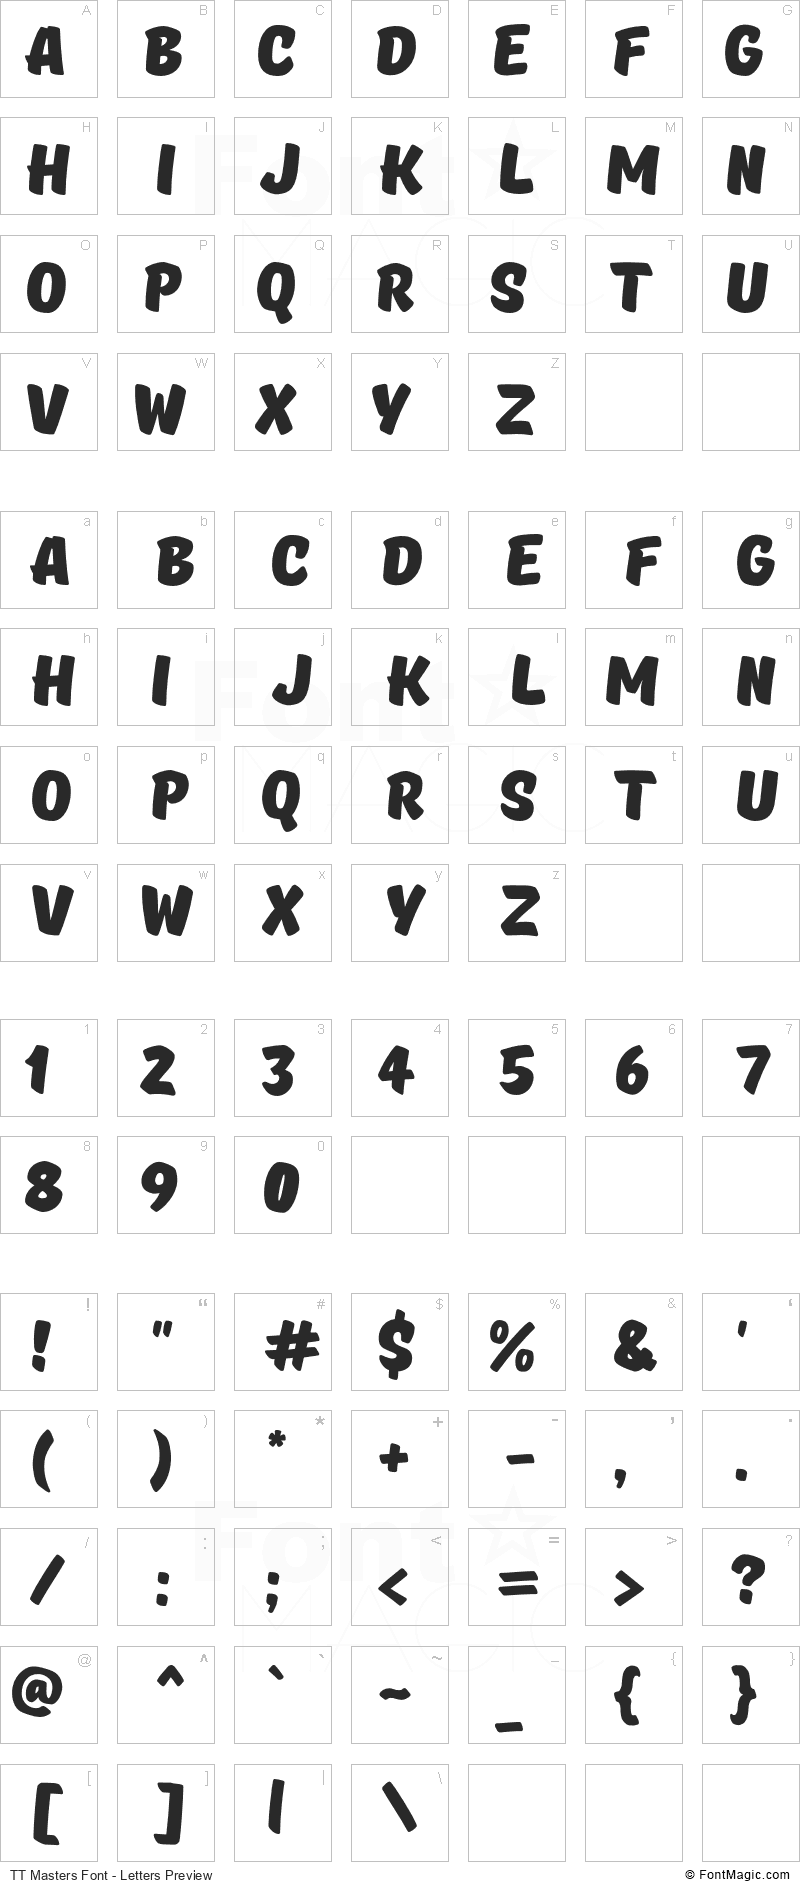 TT Masters Font - All Latters Preview Chart